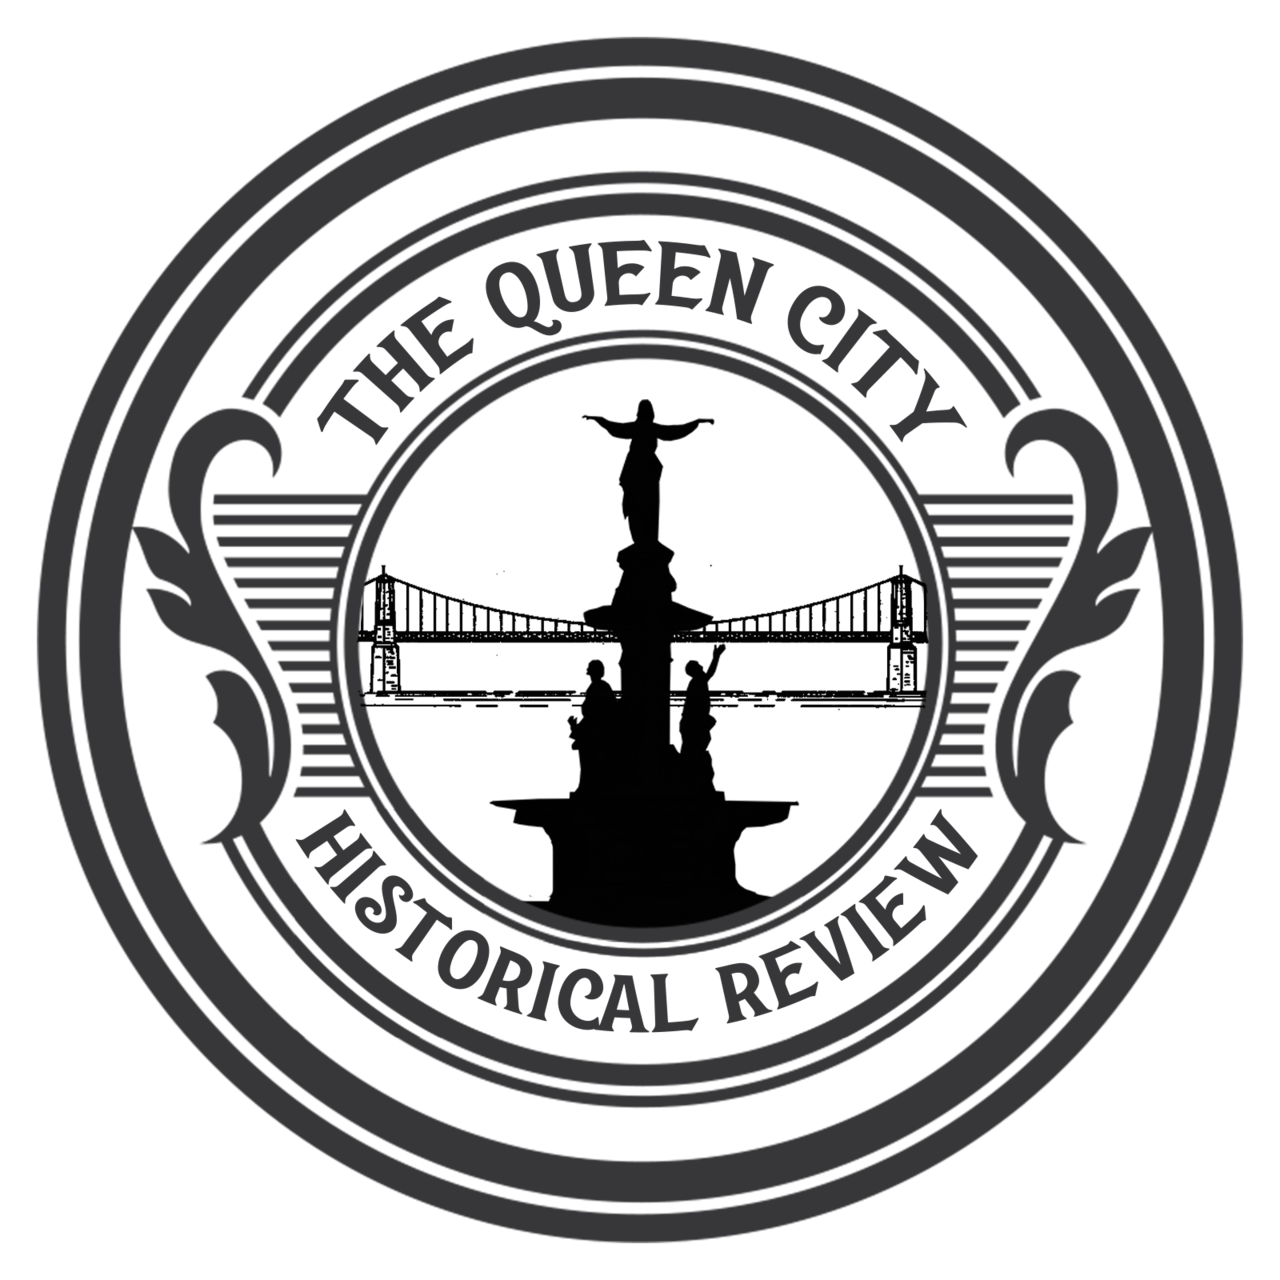 Artwork for The Queen City Historical Review 